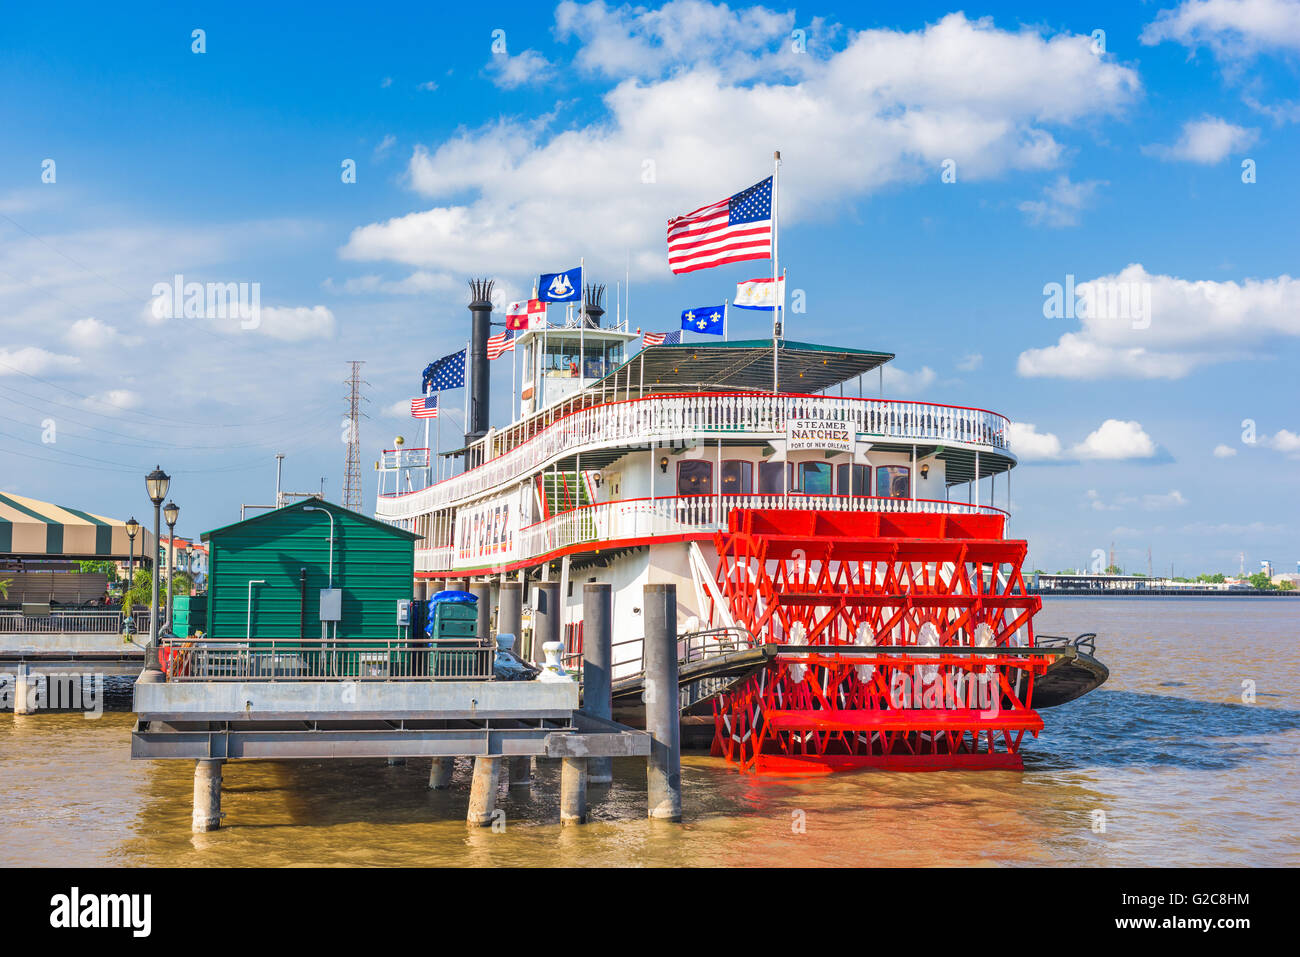 NEW ORLEANS, LOUISIANA - MAY 10, 2016: The steamboat Natchez on the Mississippi River. Stock Photo